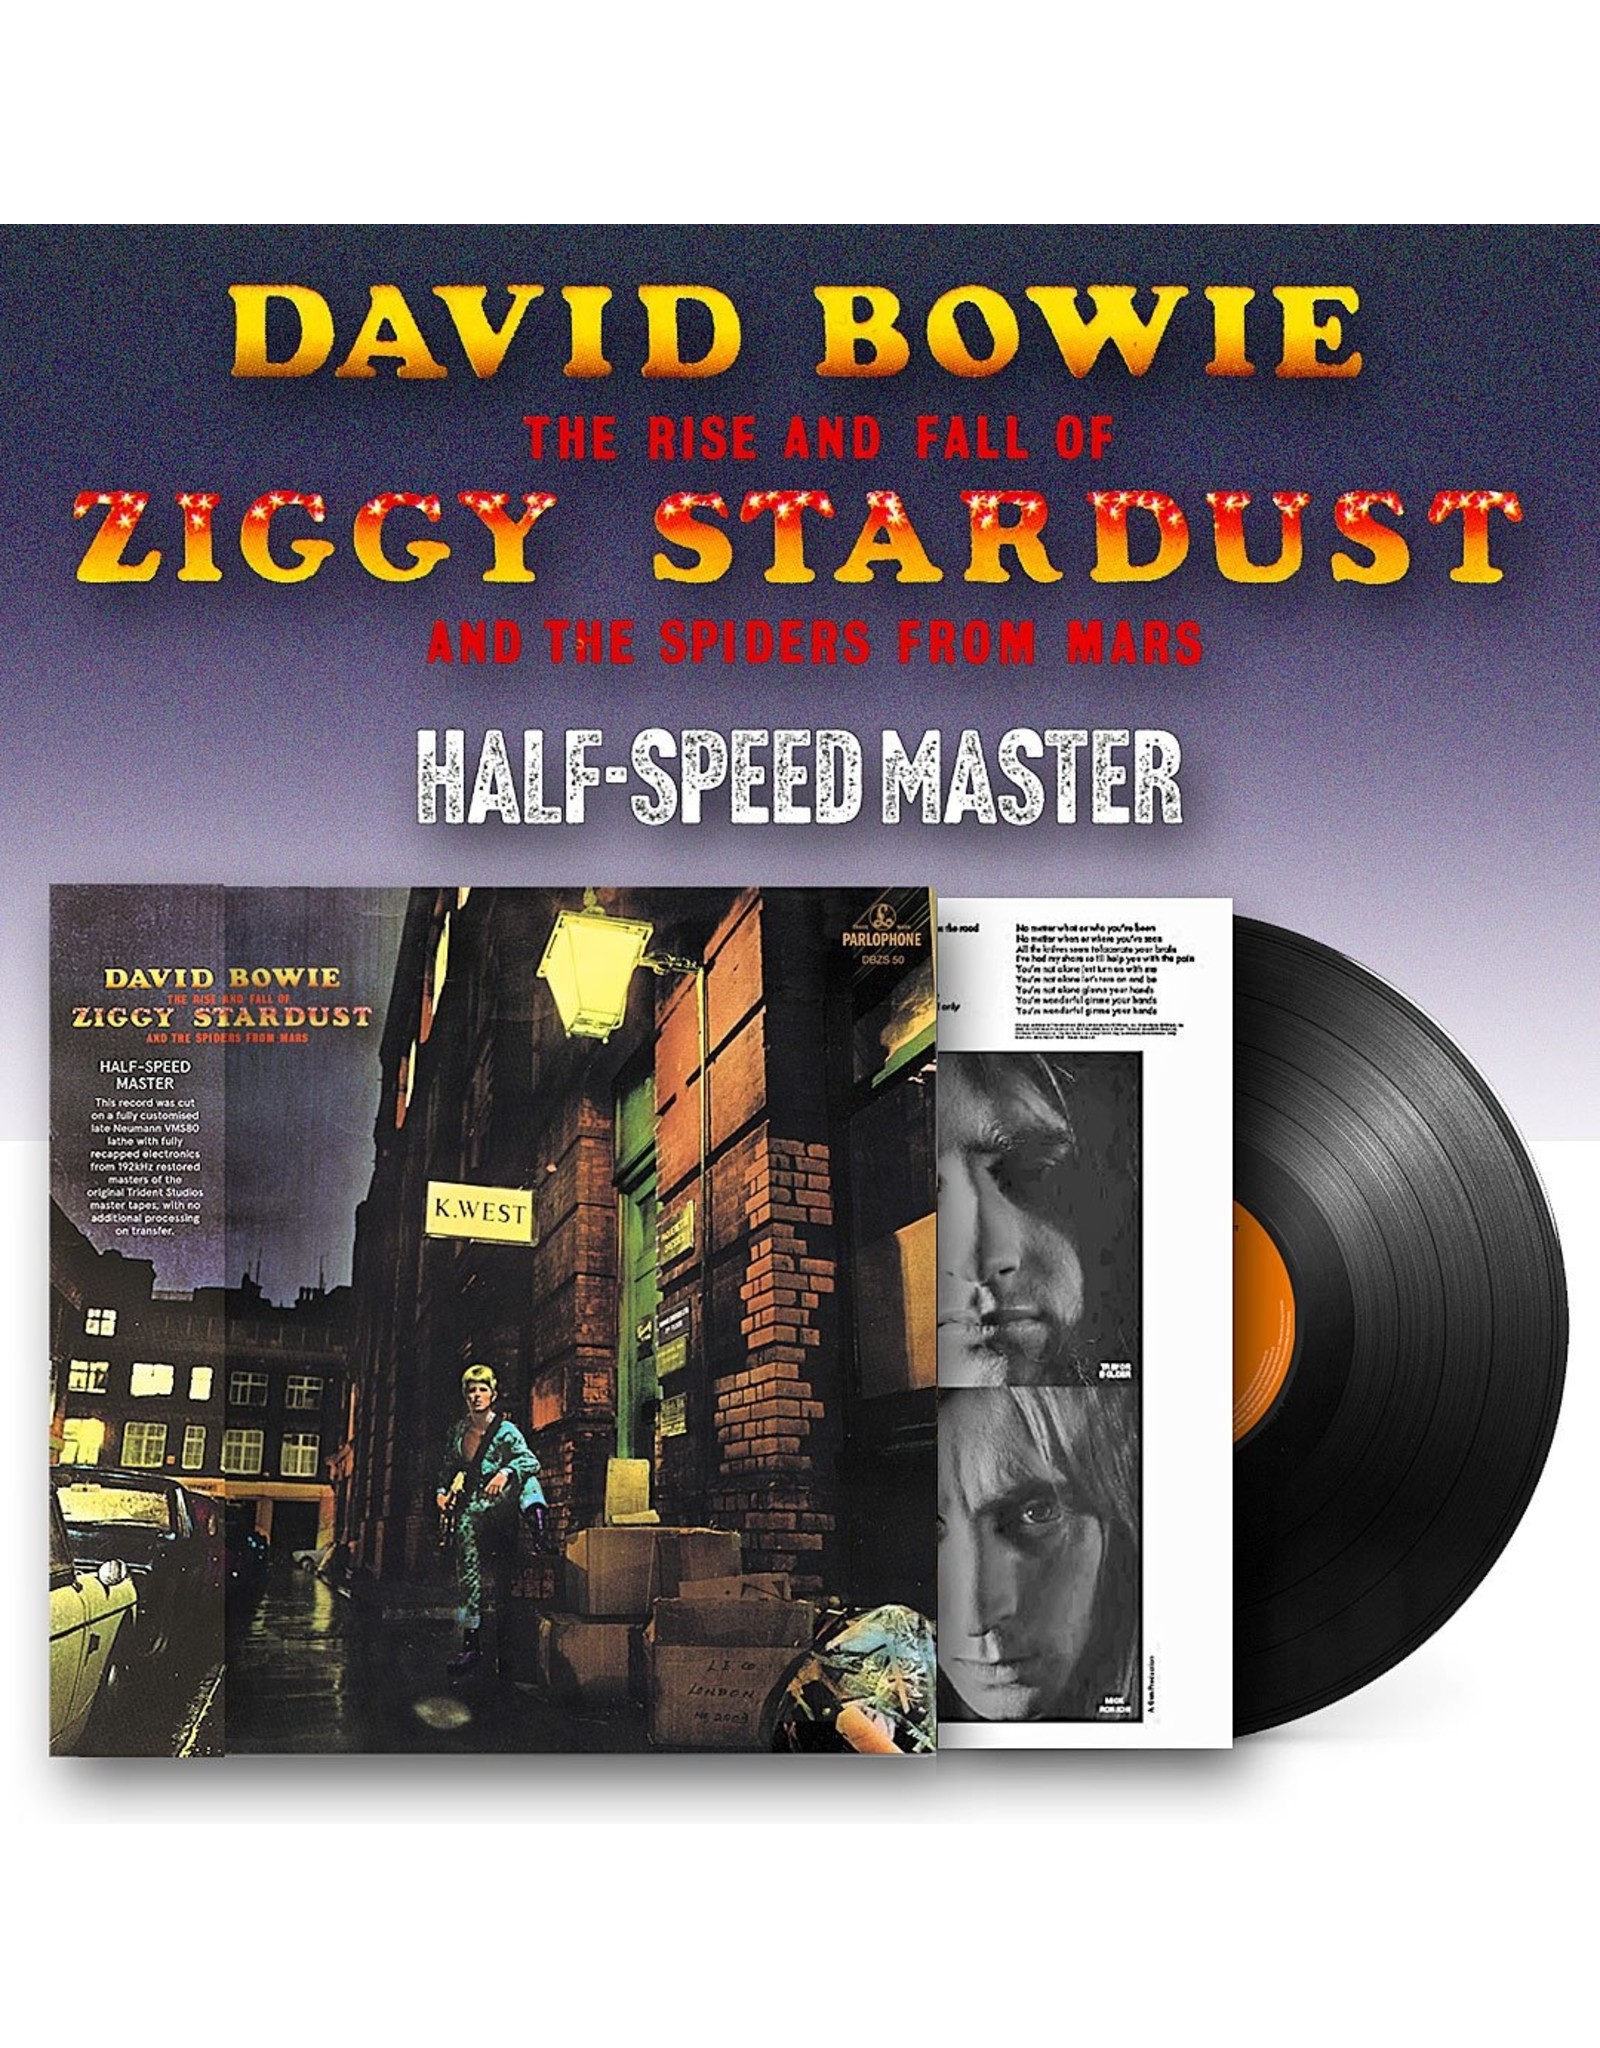 David Bowie - The Rise & Fall Of Ziggy Stardust & The Spiders From Mars  [Half Speed Master]